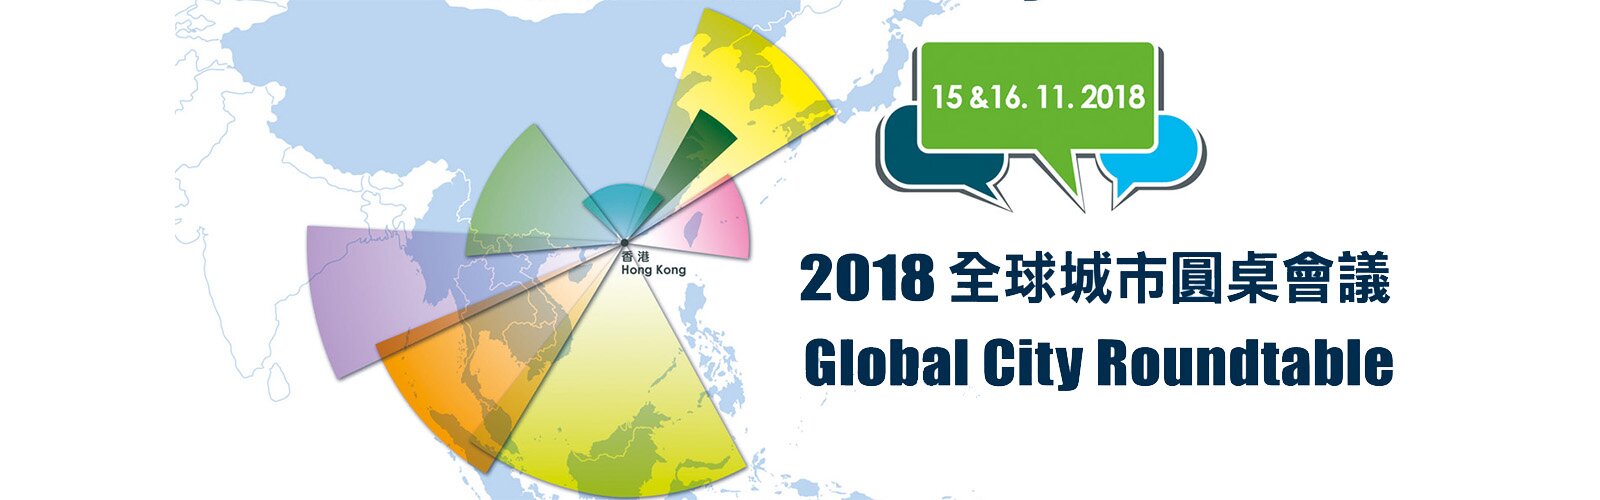 2018 Global City Roundtable